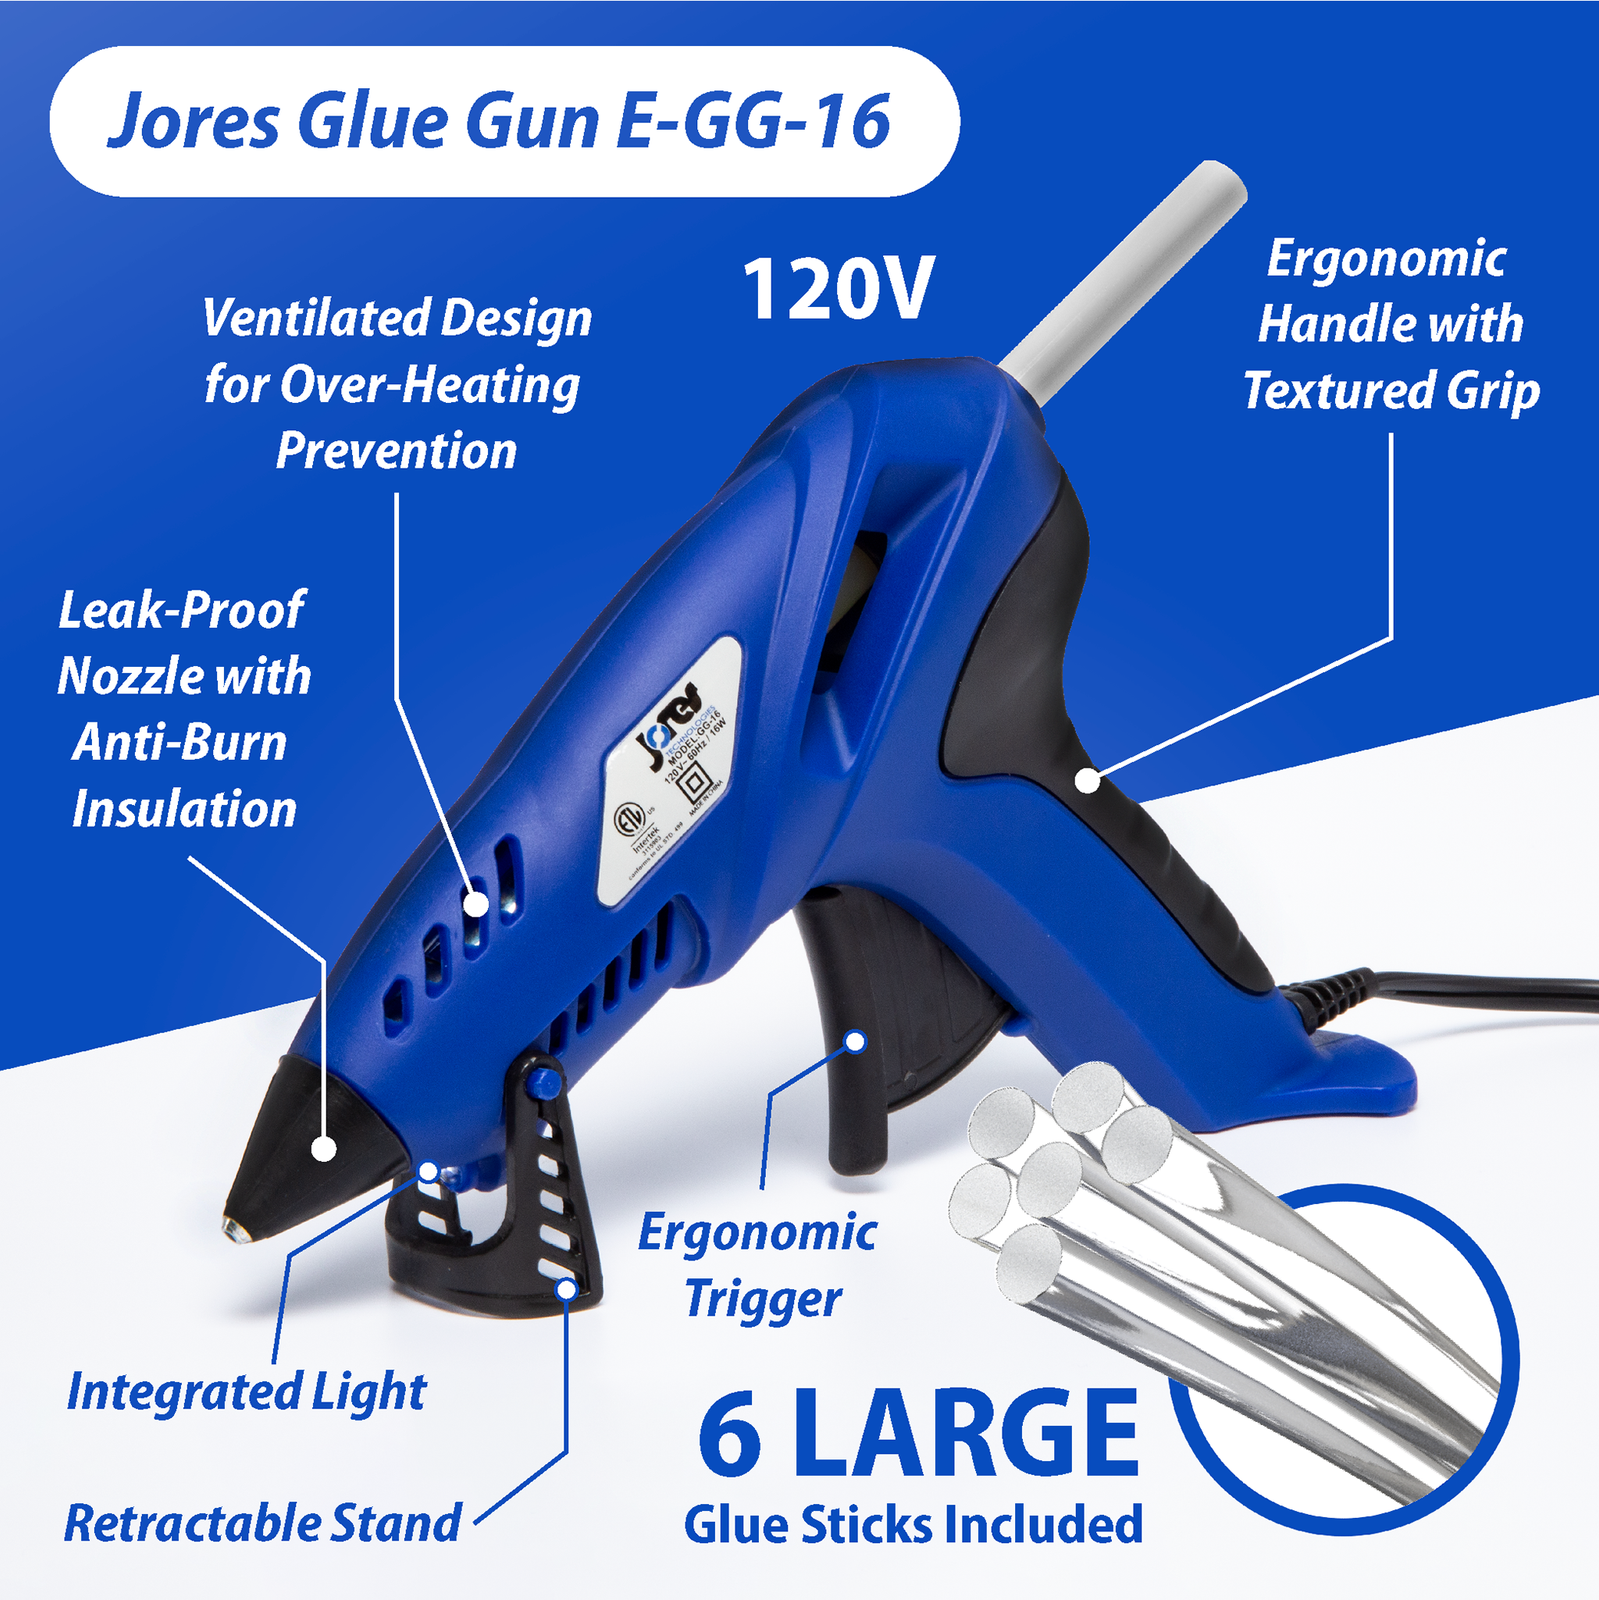 Blue and white Infographic highlighting various features on blue & black glue gun. 6 clear large glue sticks includes